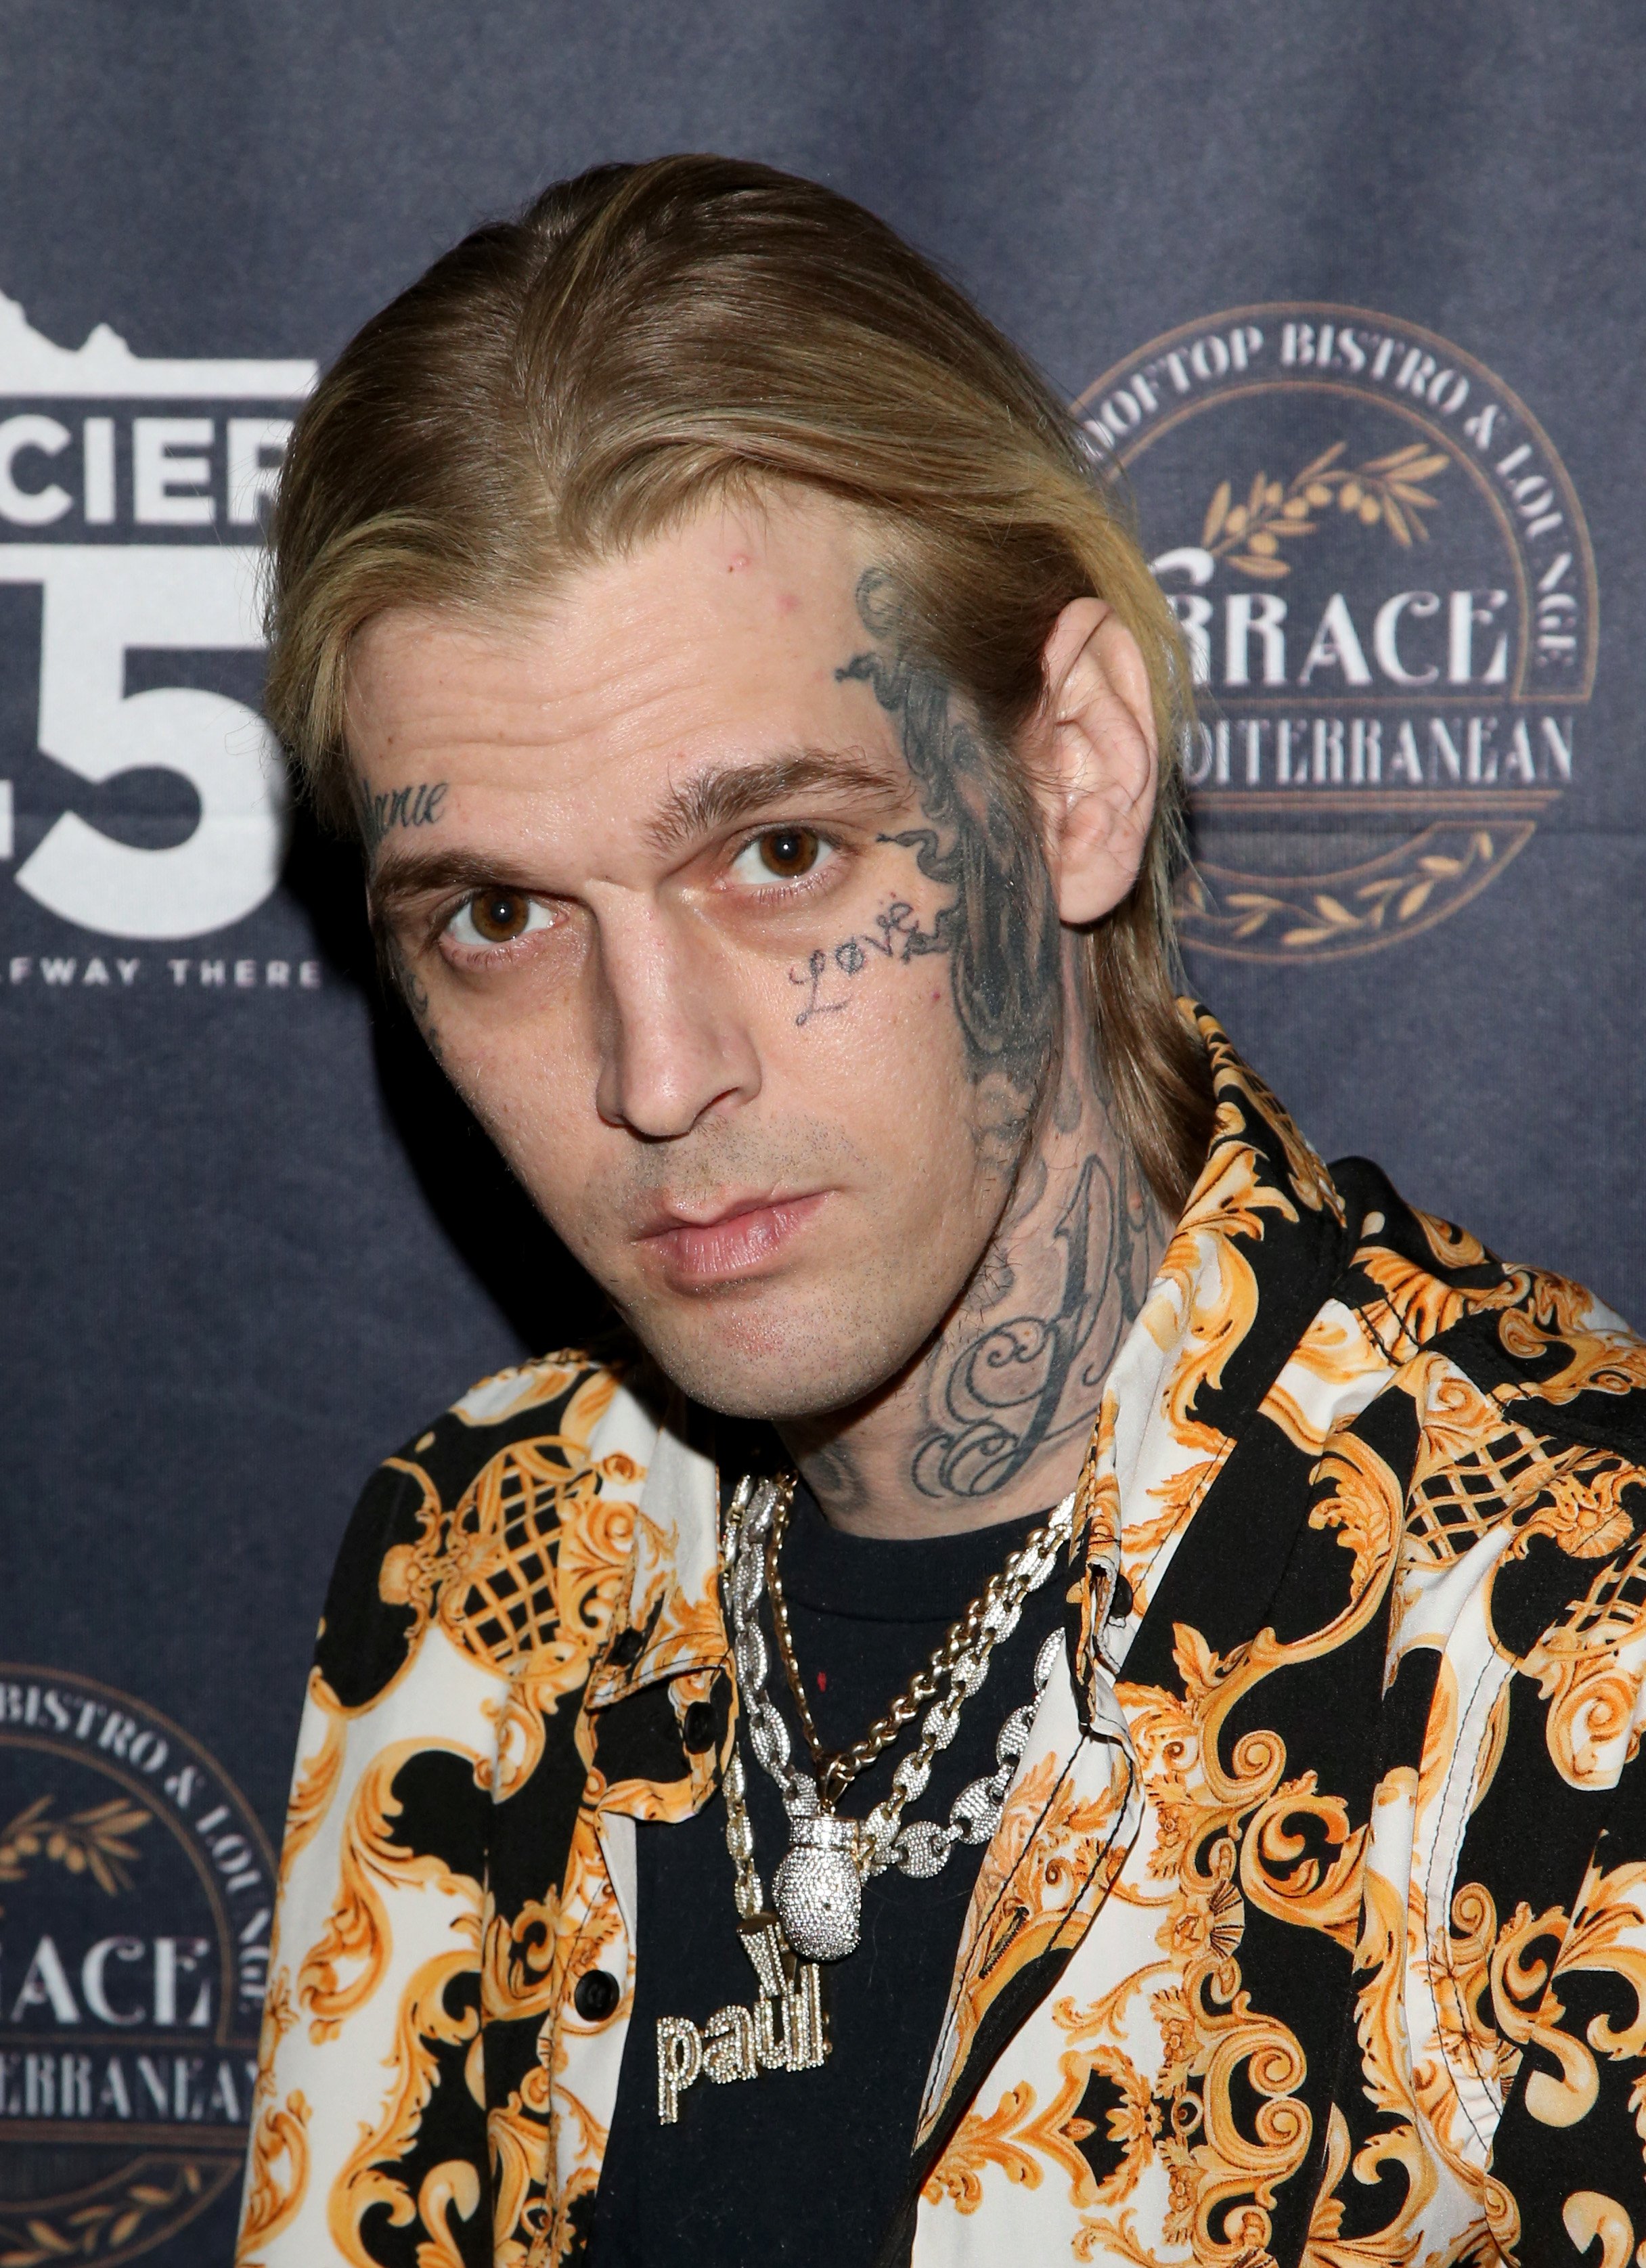  Singer and producer Aaron Carter at Larry Flynt's Hustler Club in 2022 in Las Vegas, Nevada. | Source: Getty Images